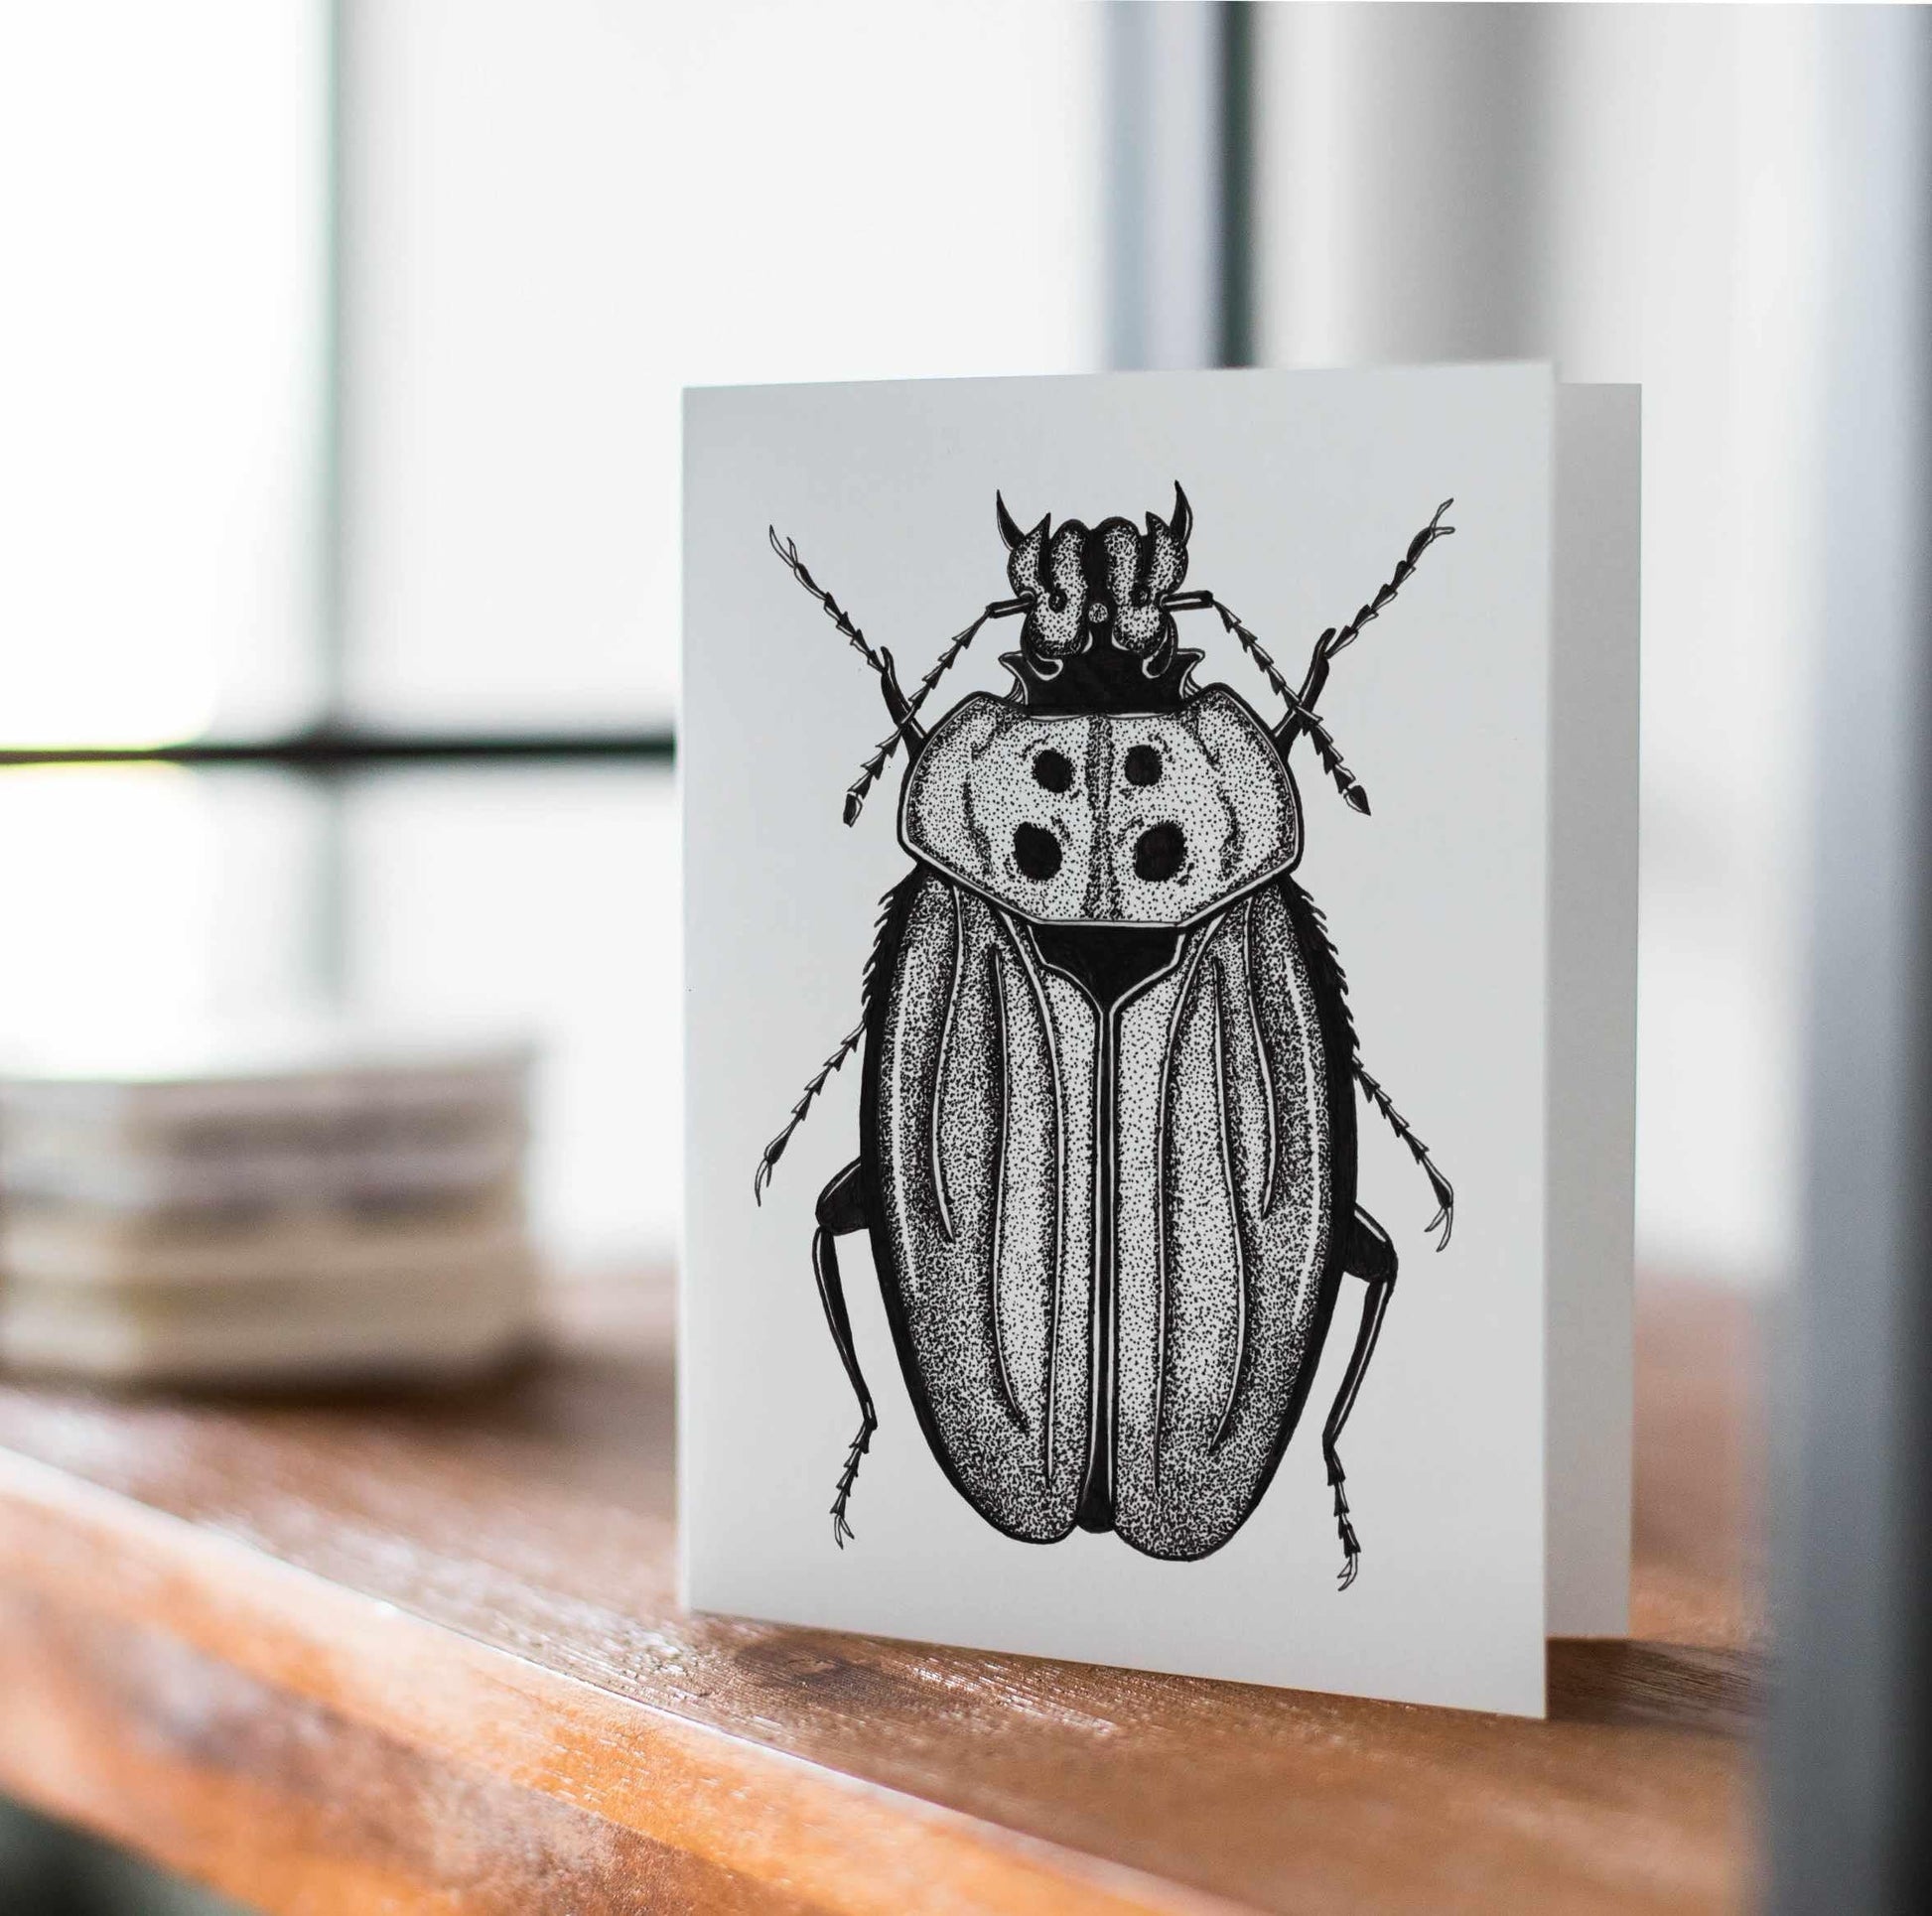 PinkPolish Design Note Cards "Beetle Distraction" Handmade Notecard